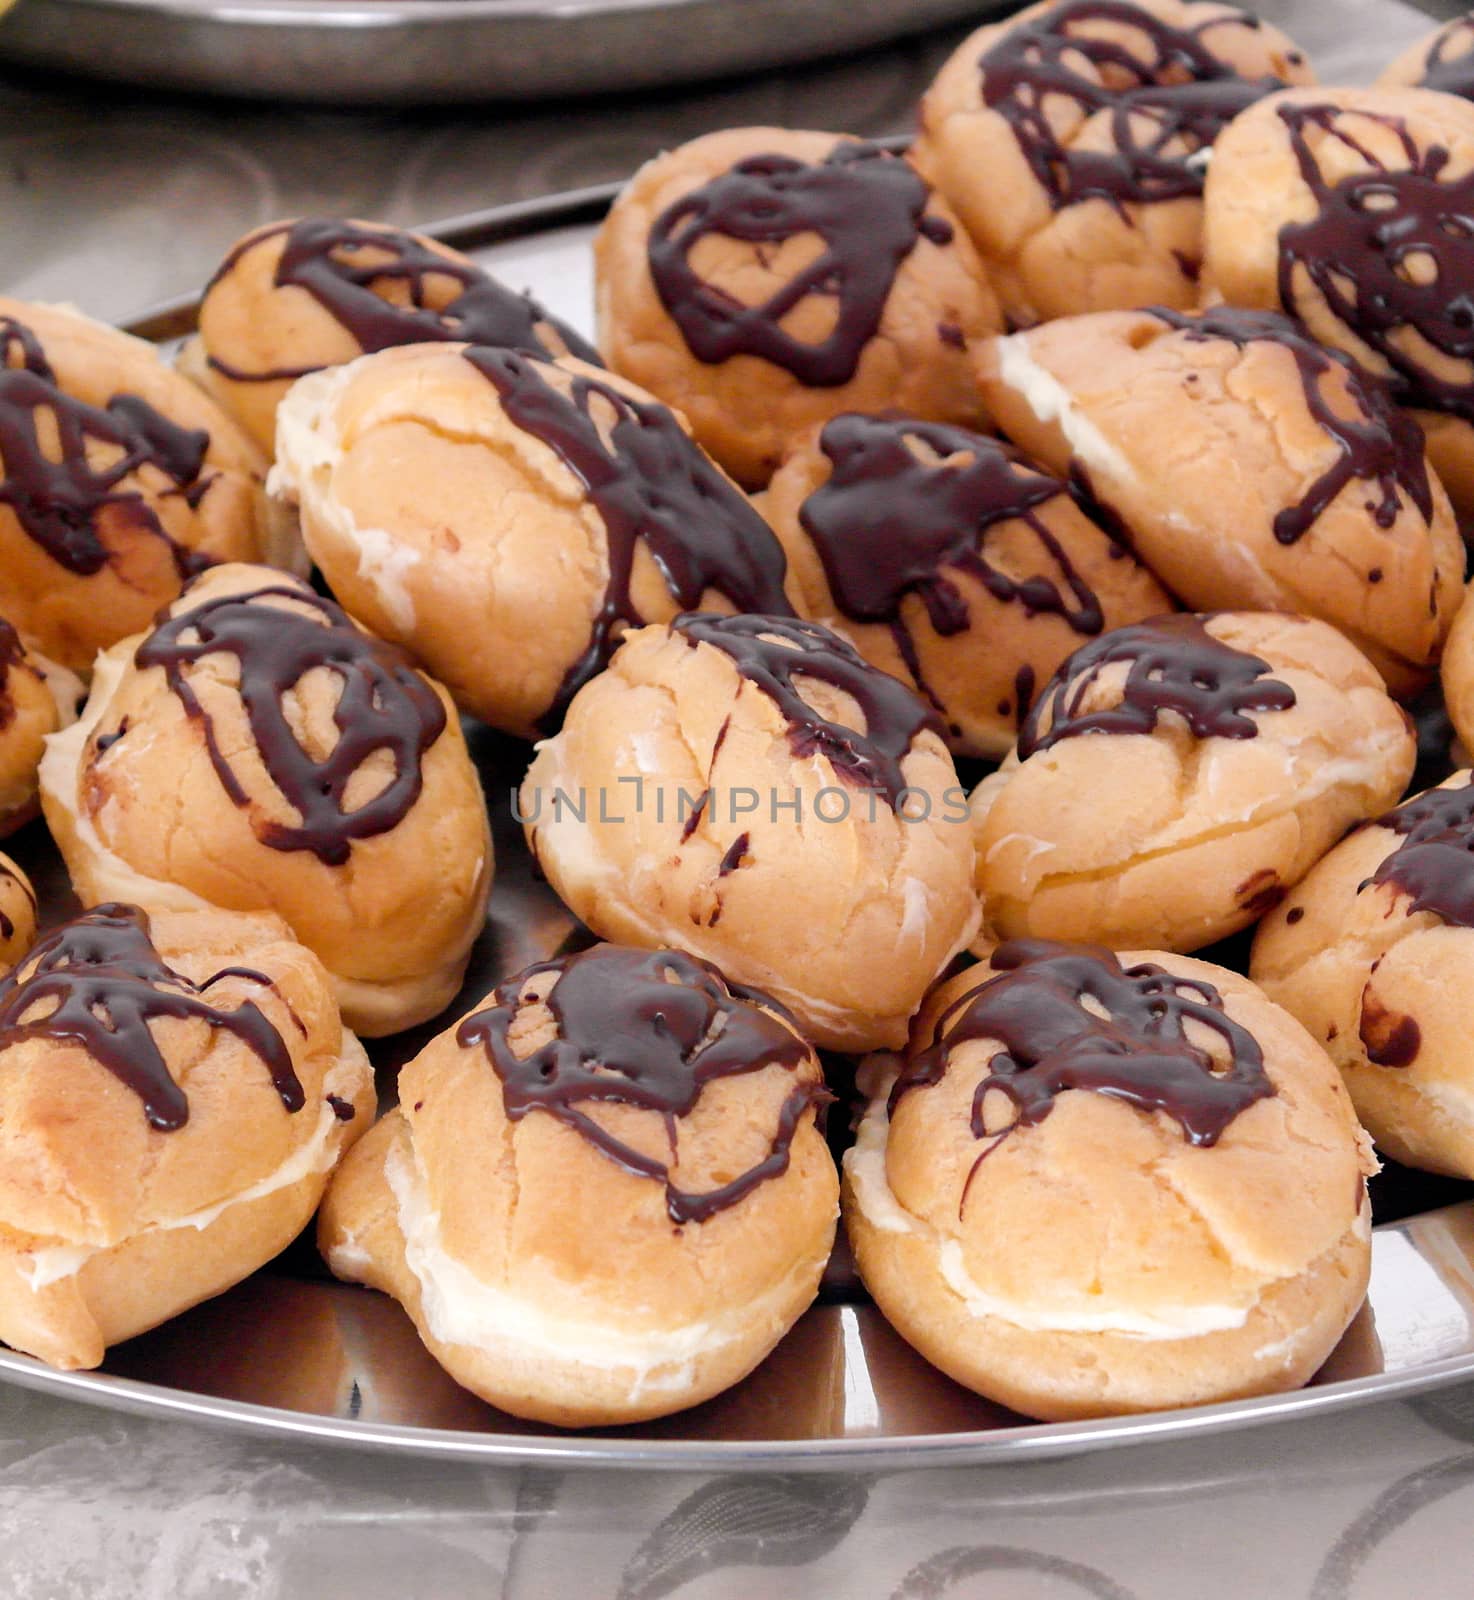 Picture of a Chocolate eclairs on metal plate